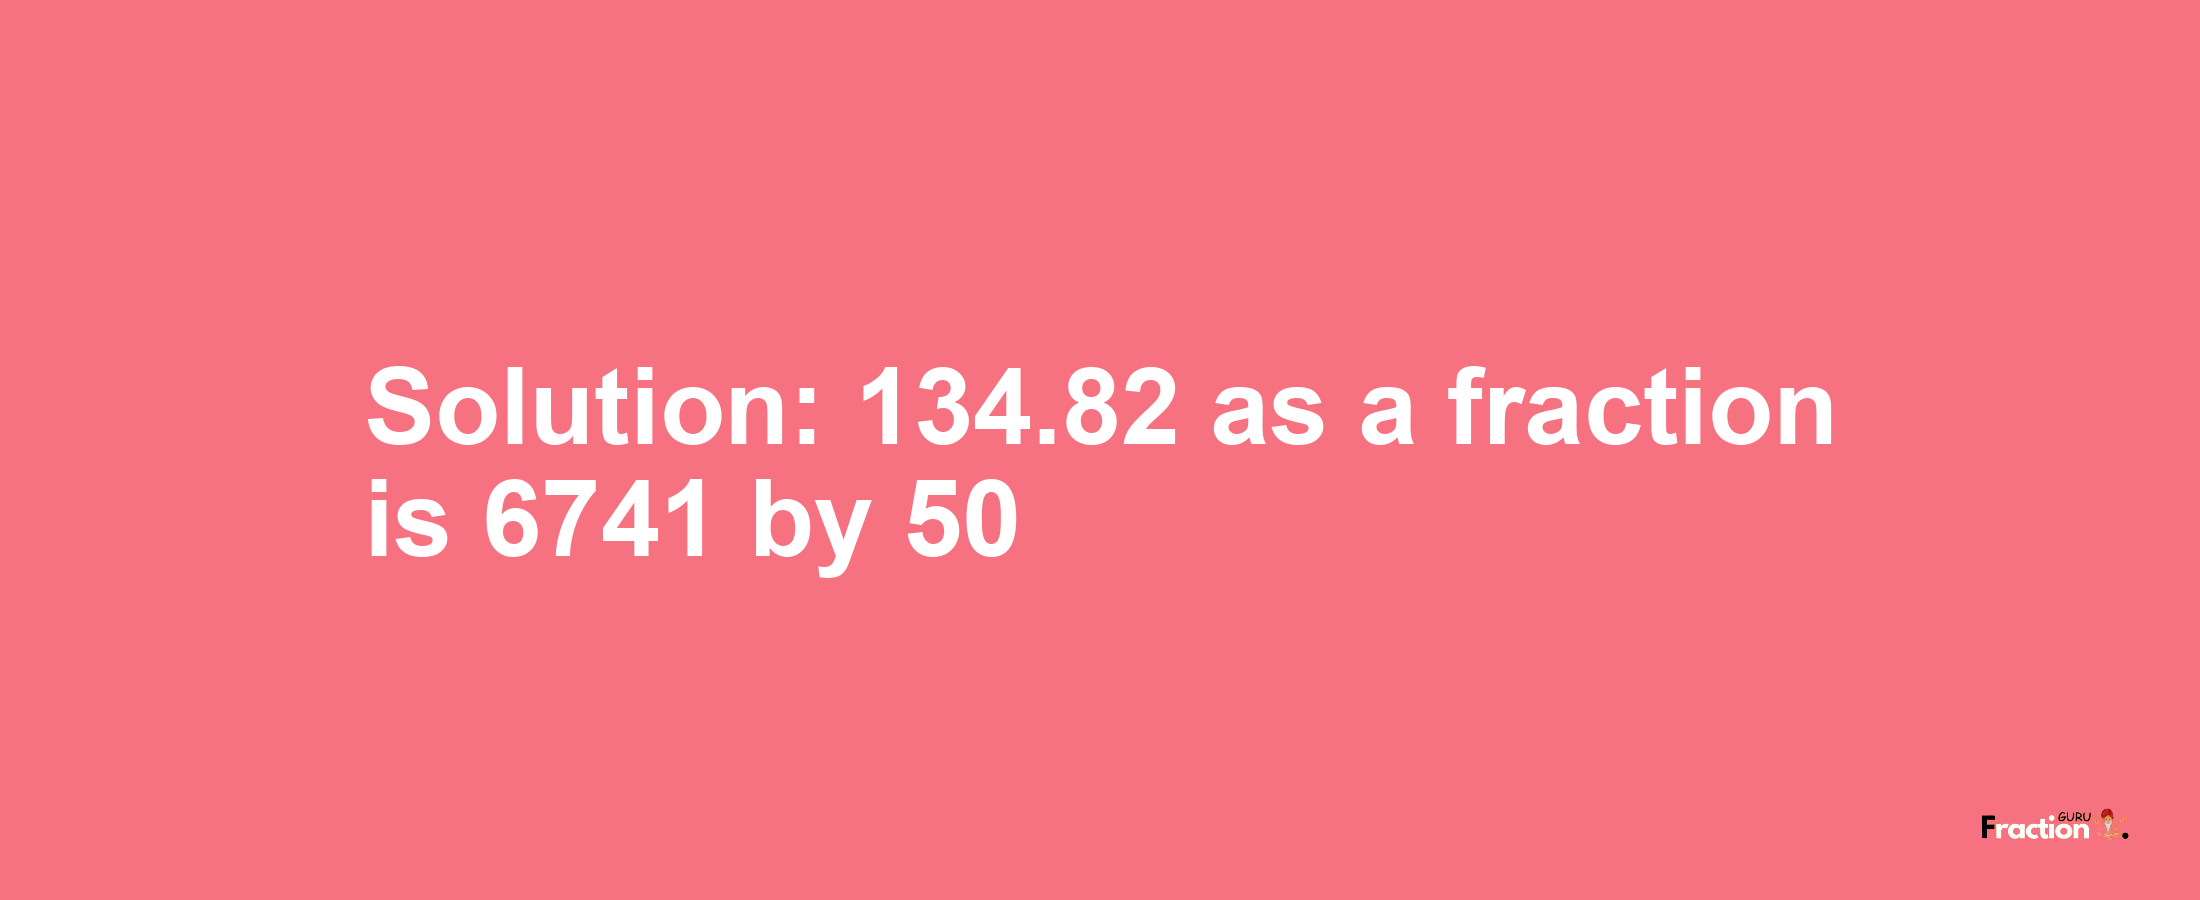 Solution:134.82 as a fraction is 6741/50